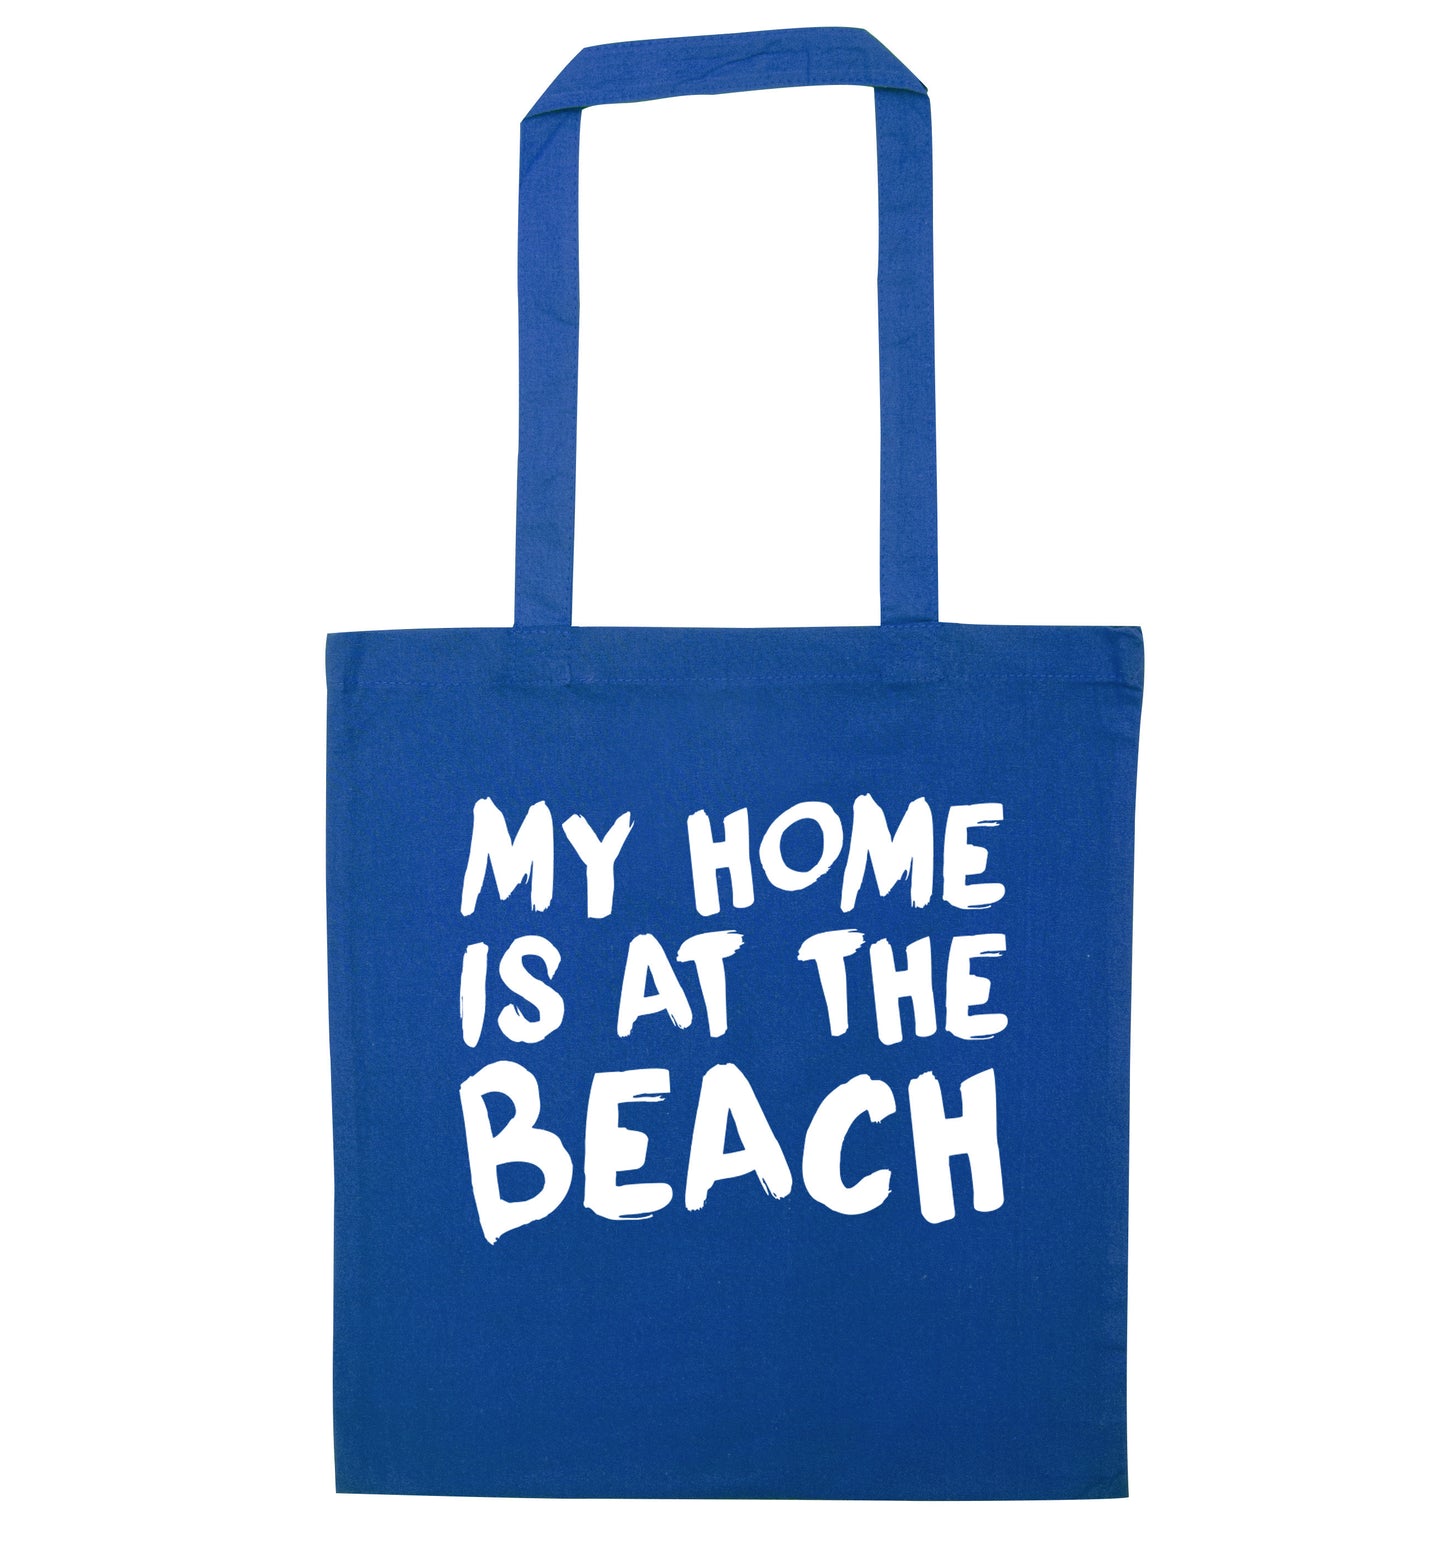 My home is at the beach blue tote bag